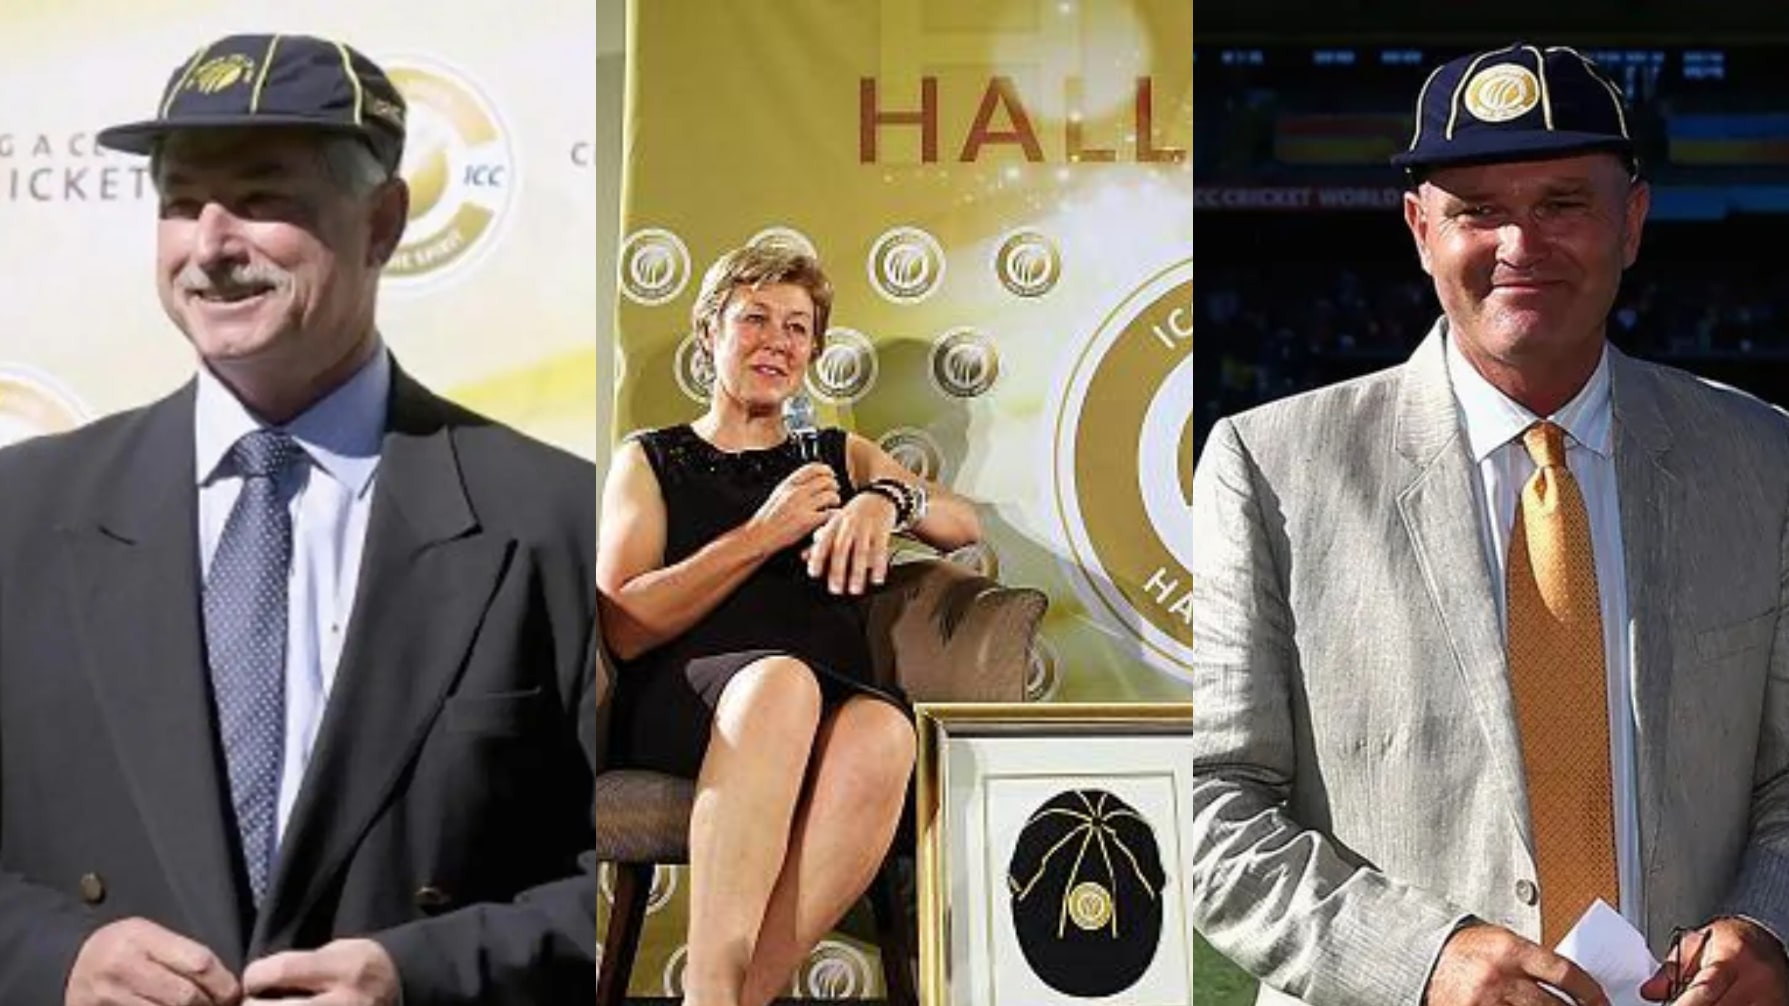 ICC erroneously lists Kiwi legends Martin Crowe, Richard Hadlee and Debbie Hockley as Australians in Hall of Fame